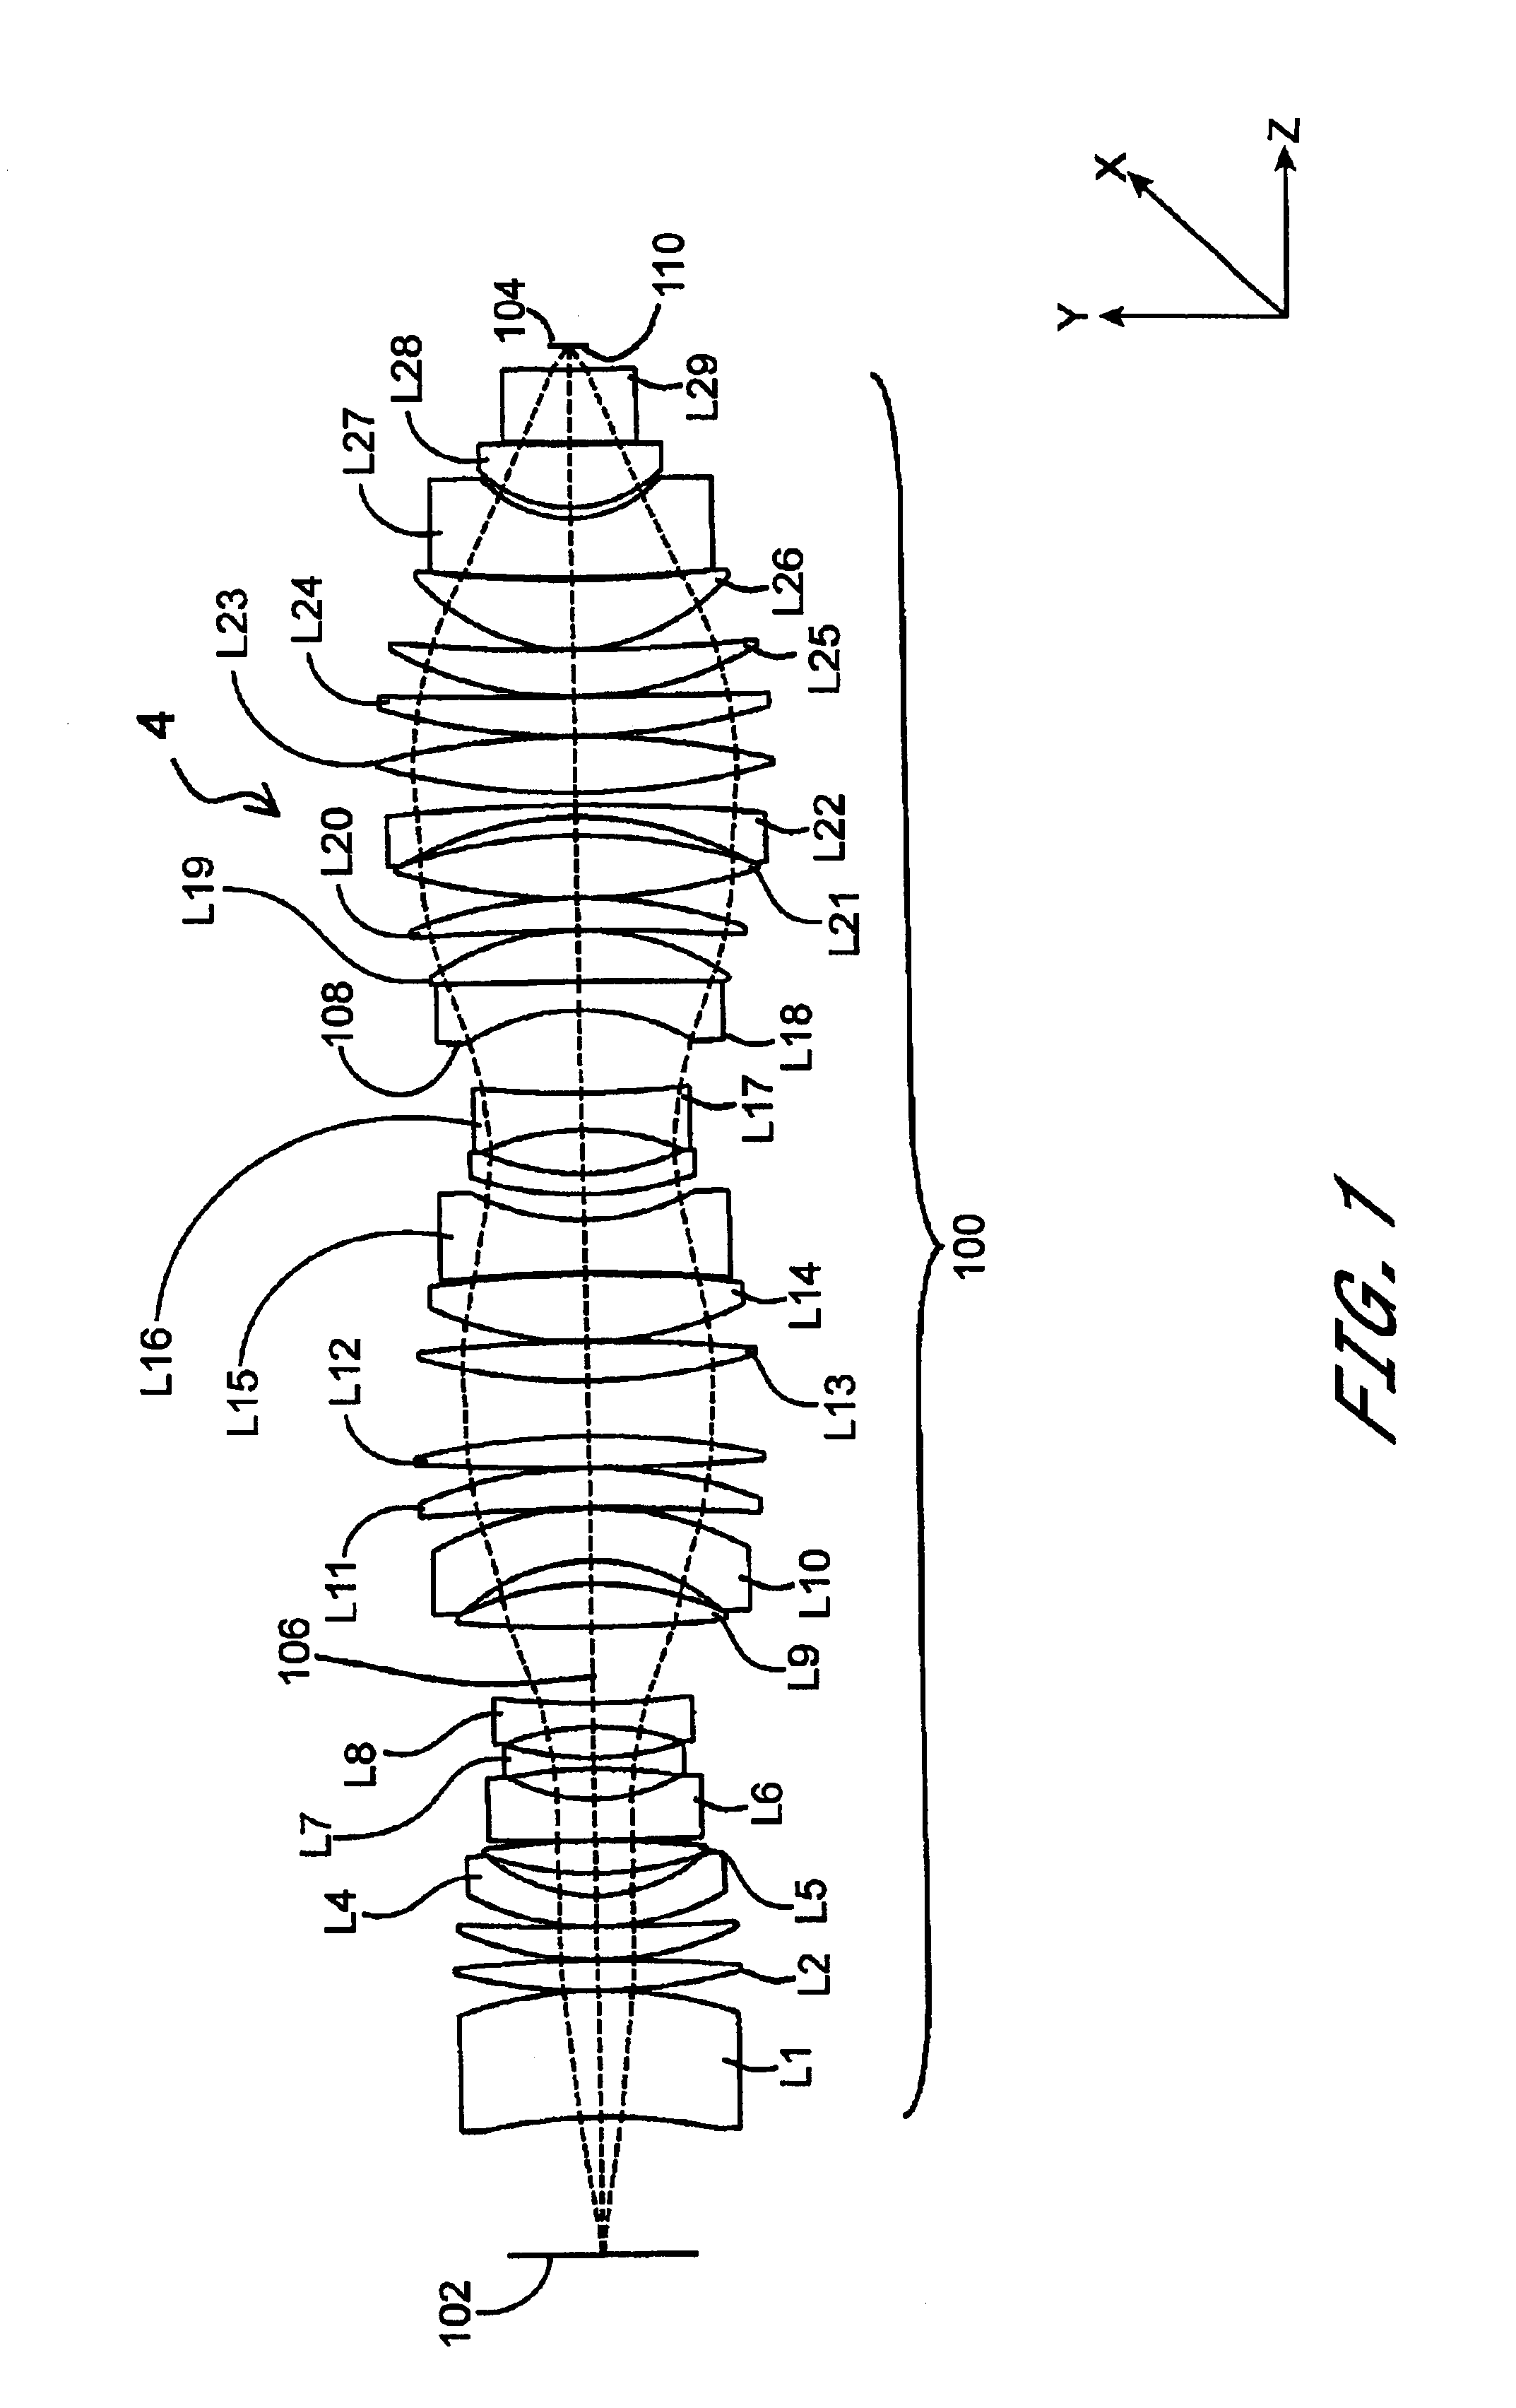 Reducing aberration in optical systems comprising cubic crystalline optical elements